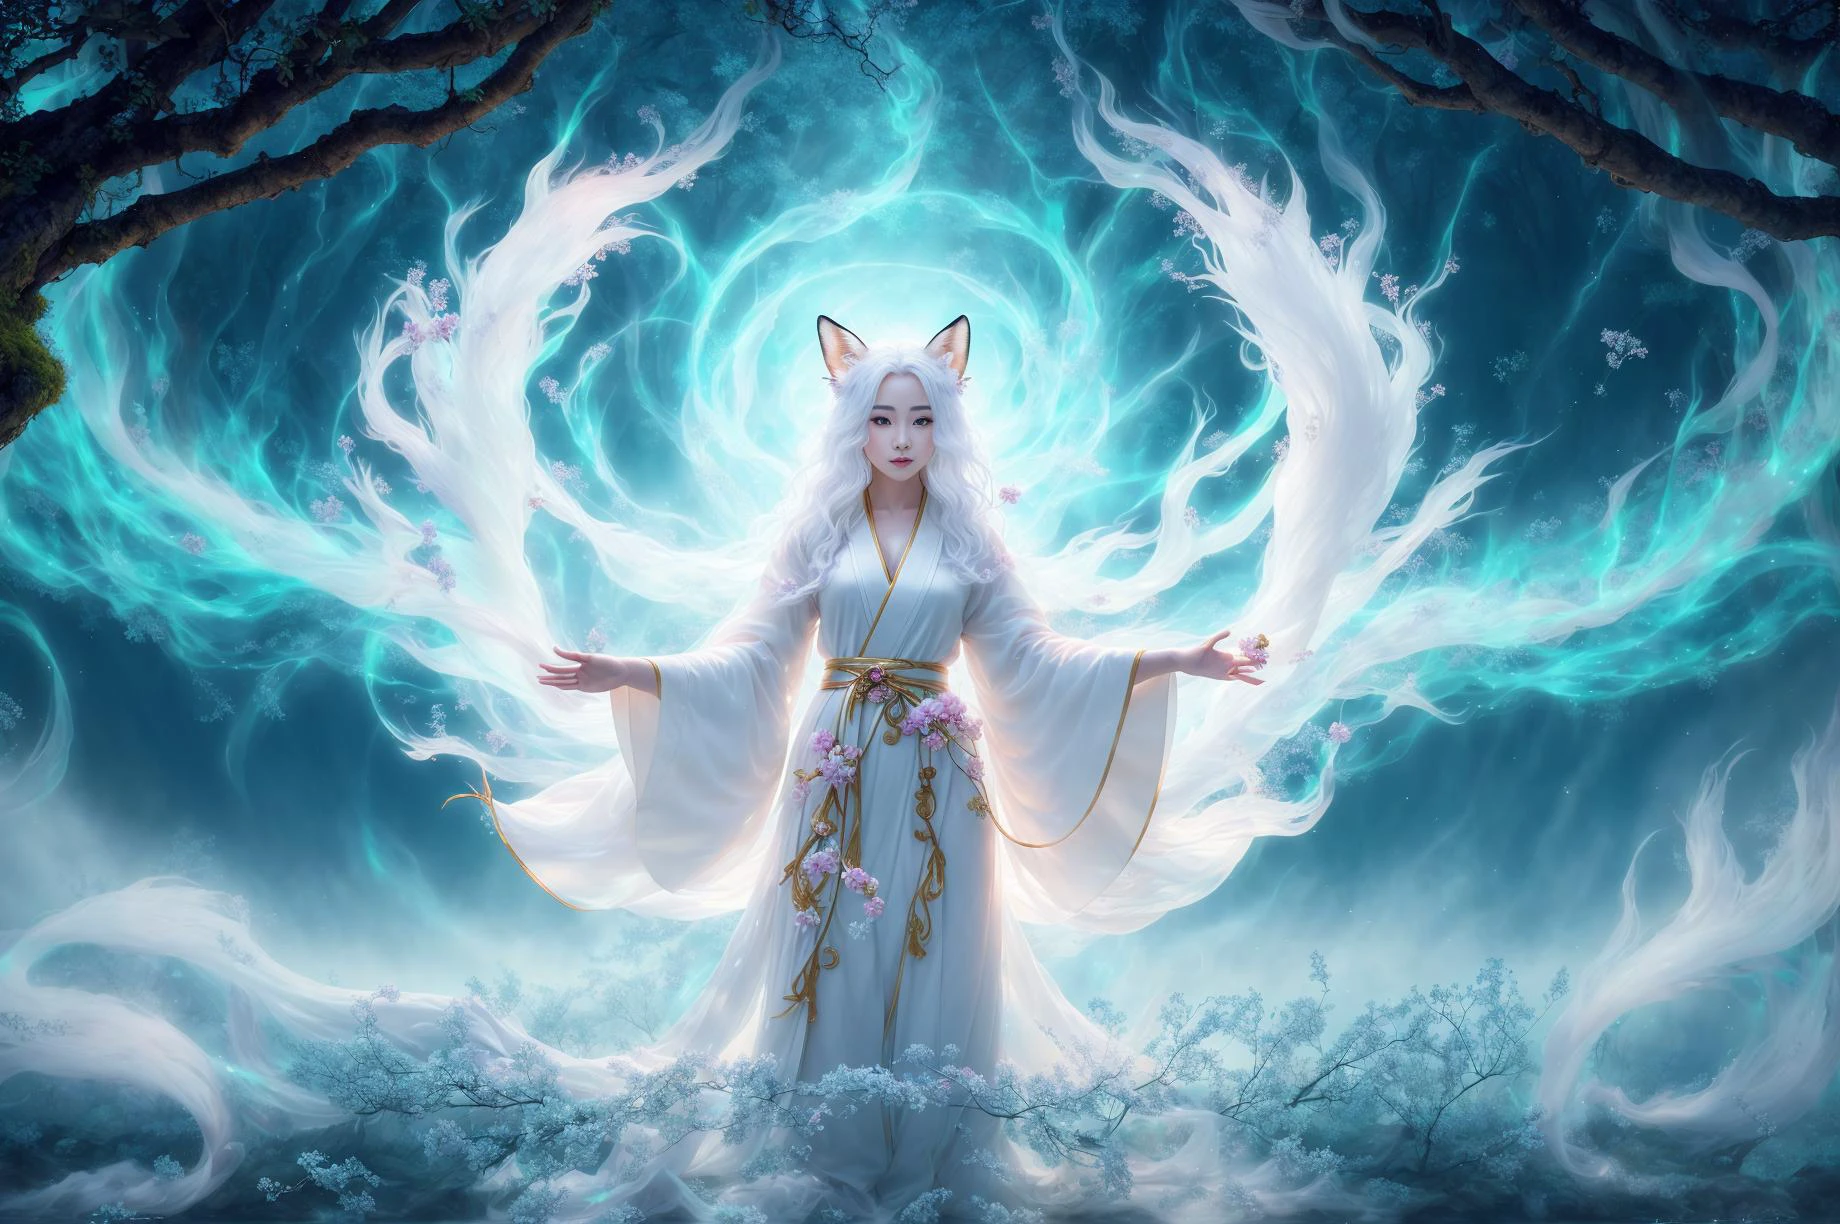 a beautiful and ethereal fox spirit dressed in a flowing white Chinese robe. The image captures the fox spirit standing gracefully on the water's surface, surrounded by white clouds and mist that lend an otherworldly quality to the scene. The fox spirit's long white hair and robes are swept up by the wind, adding movement and fluidity to the image. Use Midjourney's advanced brush tools to create intricate folds and textures in the fox spirit's robes and hair, and experiment with different color palettes and brush strokes to bring out the ethereal quality of the scene. The fox spirit's beauty is further enhanced by the way her image is sometimes obscured by the surrounding mist, giving the scene a sense of mystery and enchantment. With Midjourney's powerful tools, you can bring this captivating and ethereal scene to life with incredible detail and beauty.
hdr, (photorealism, masterpiece quality, best quality), , pureerosface_v1,ulzzang-6500-v1.1,